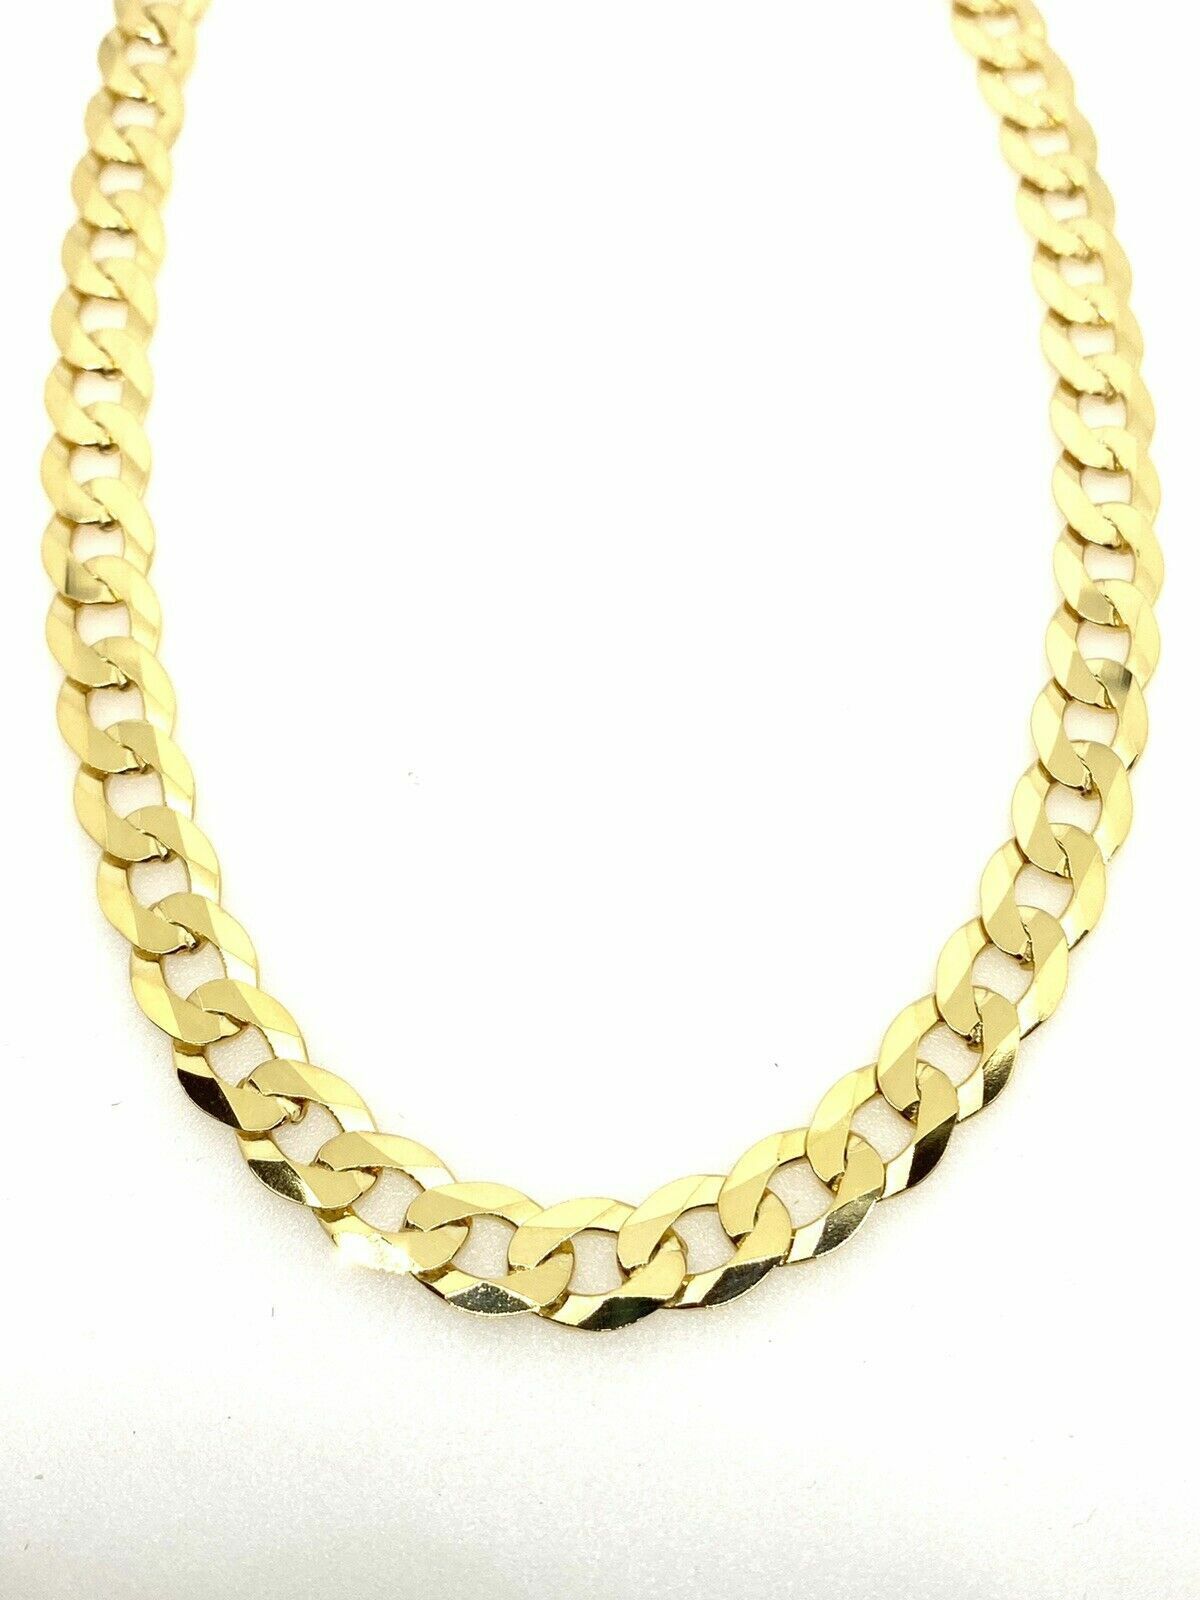 Buy Q&S Jewels Gold Necklaces for Women Men & Teens 1.5mm Box Chain Necklace  Stainless Steel 18K Gold Plated,Fashion Statement Jewlery,Thin Yet Durable  Chain, Wear Lone or with Pendant, 16-26 Inch Online